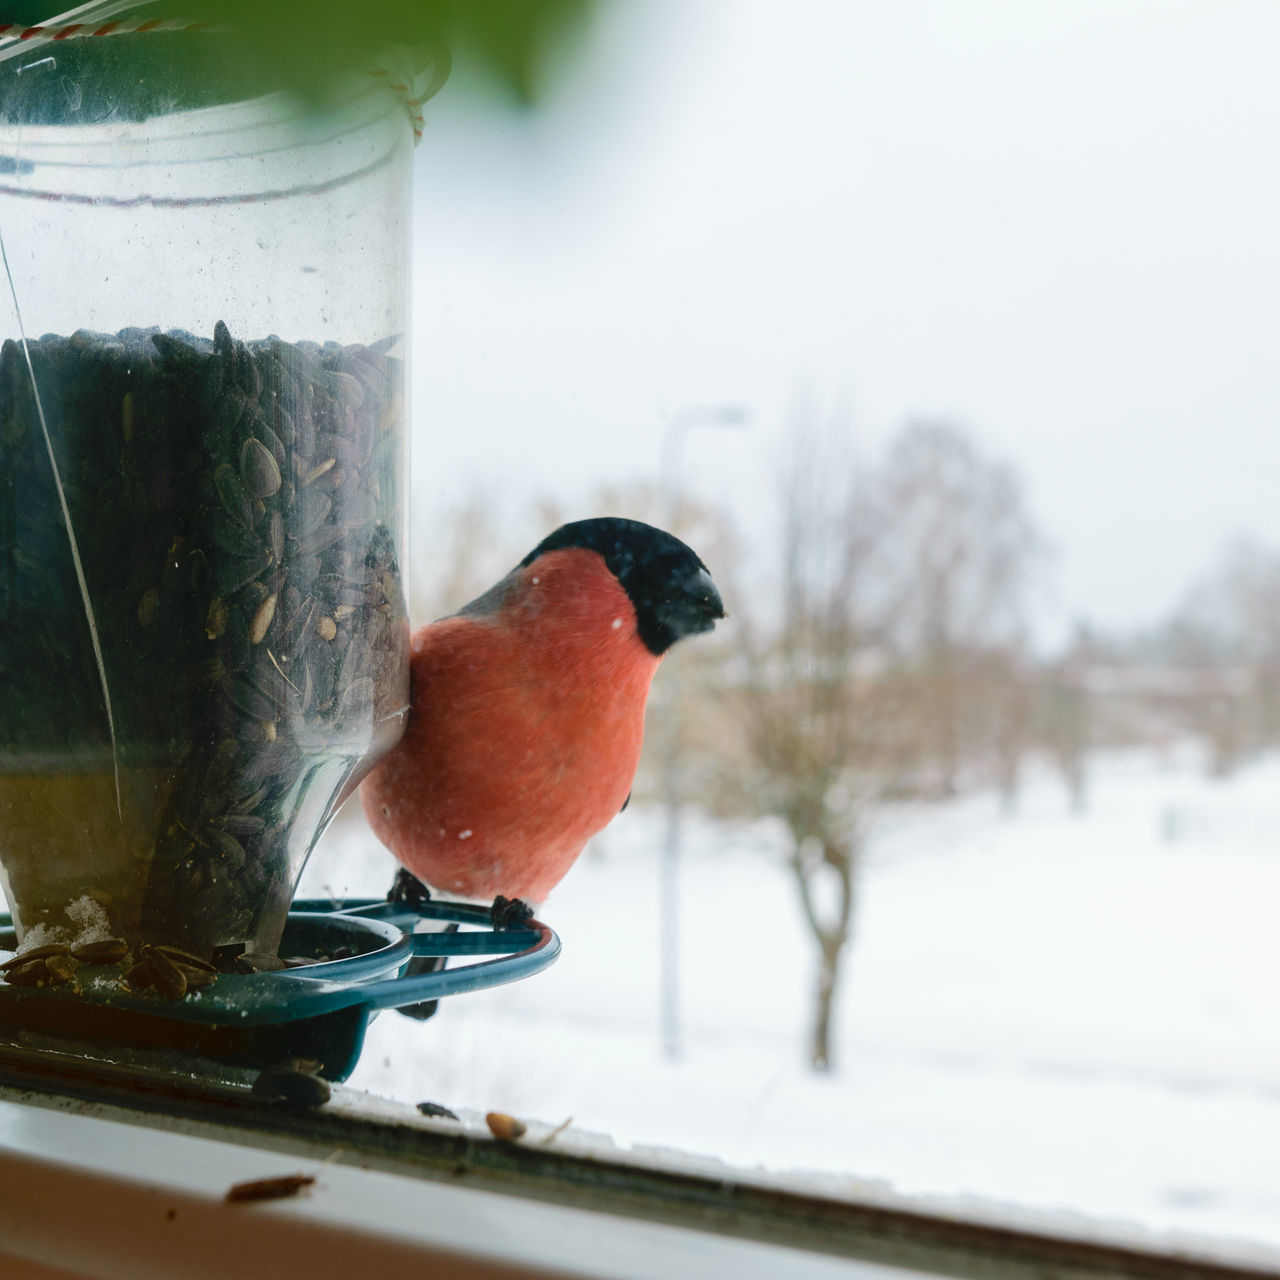 cold temperature, winter, bird, animal, animal themes, snow, food and drink, nature, drink, food, no people, outdoors, animal wildlife, frozen, glass, day, one animal, focus on foreground, close-up